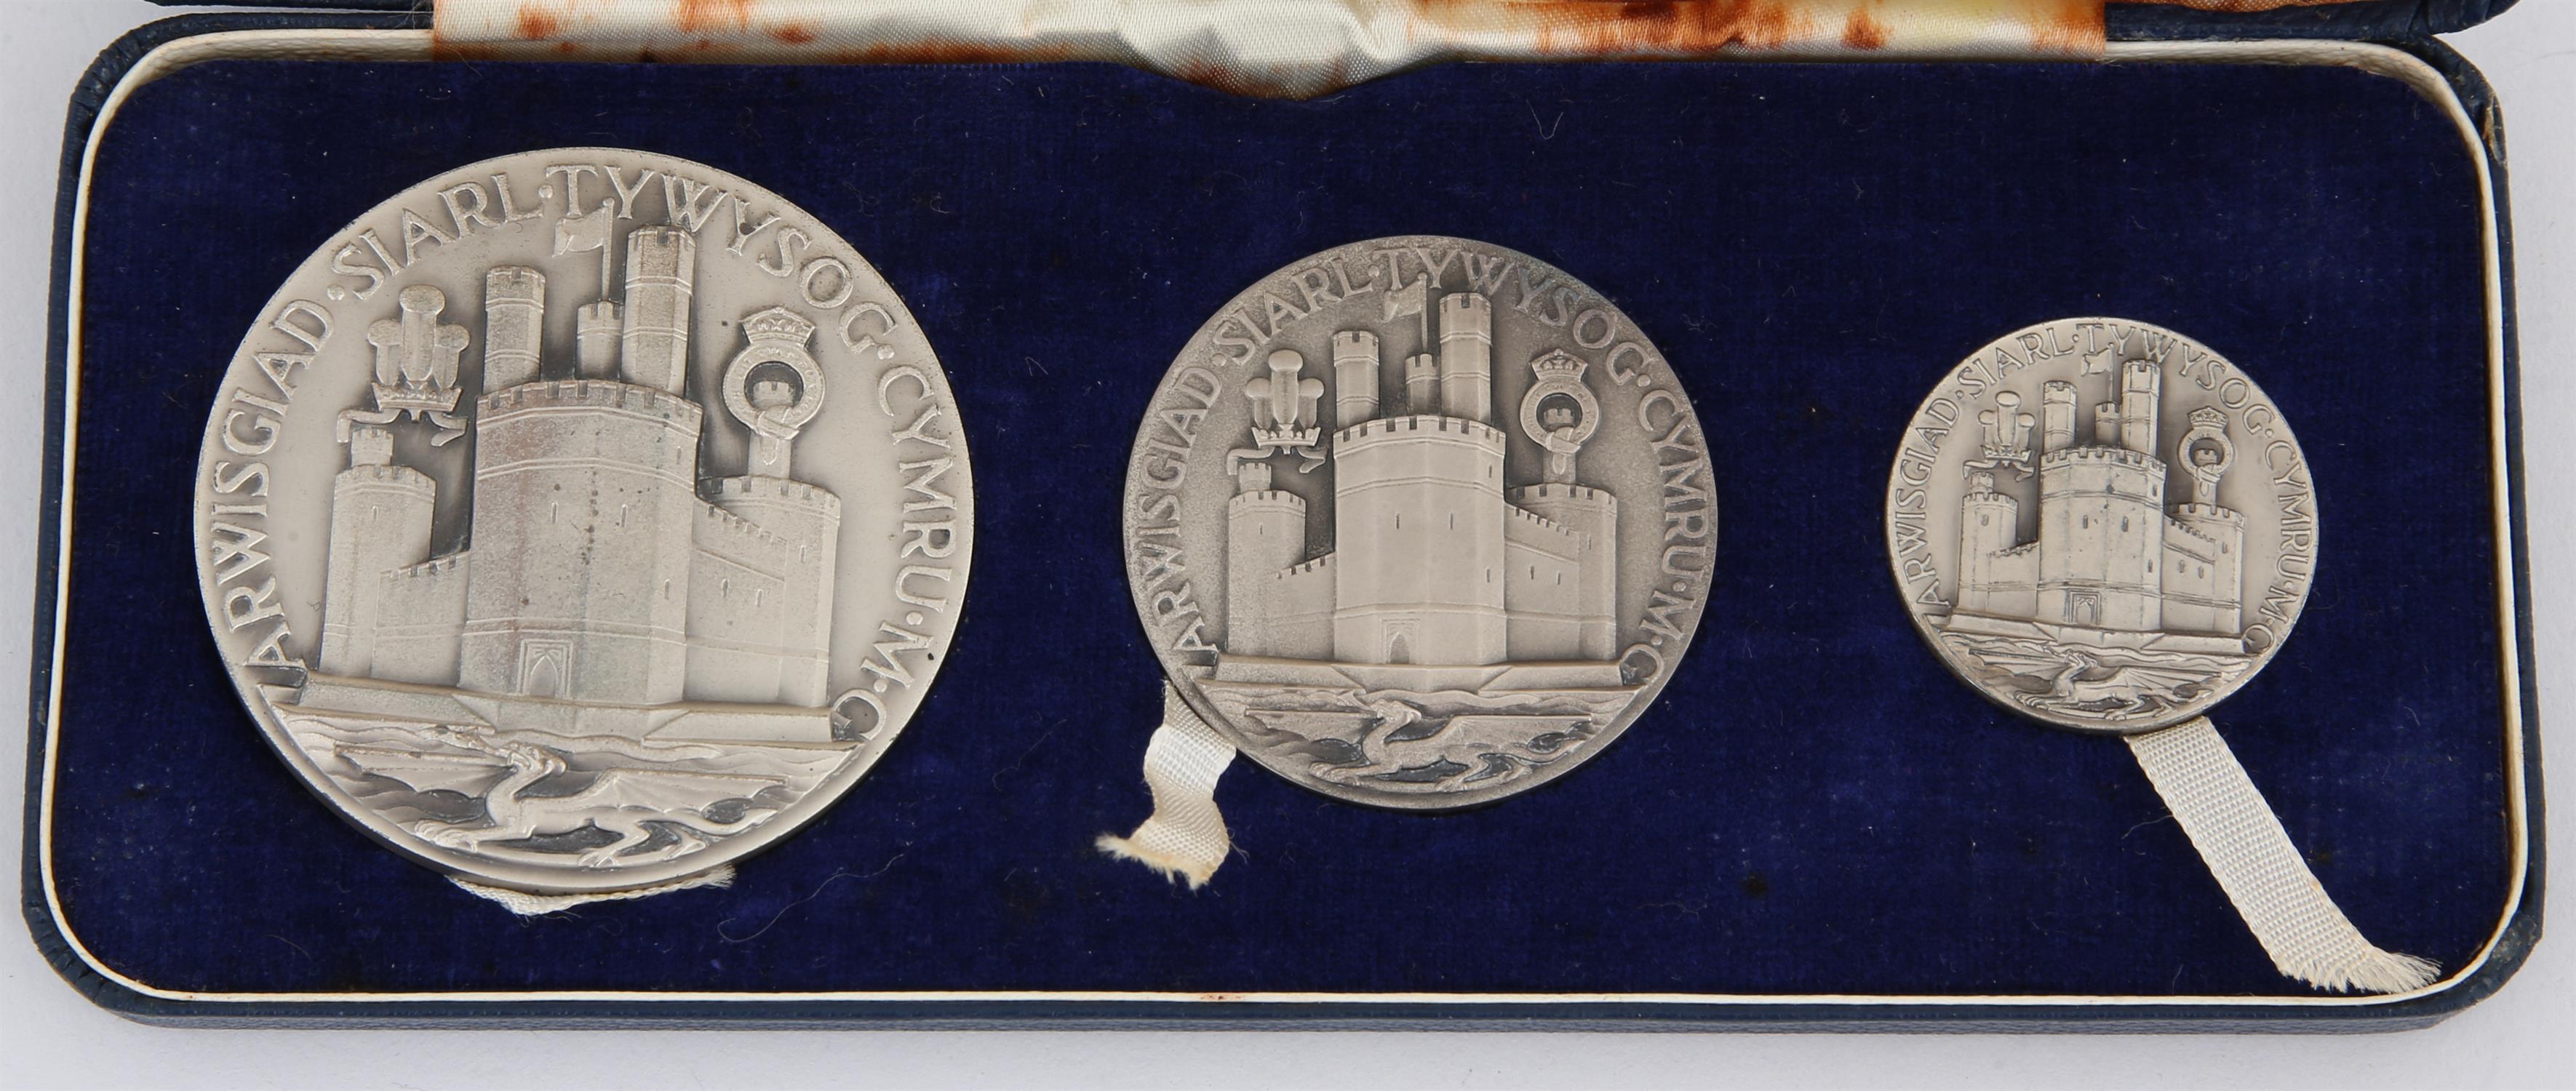 1969 Britannia silver Prince of Wales Investiture three-piece coin set by John Pinches of London, - Image 6 of 6